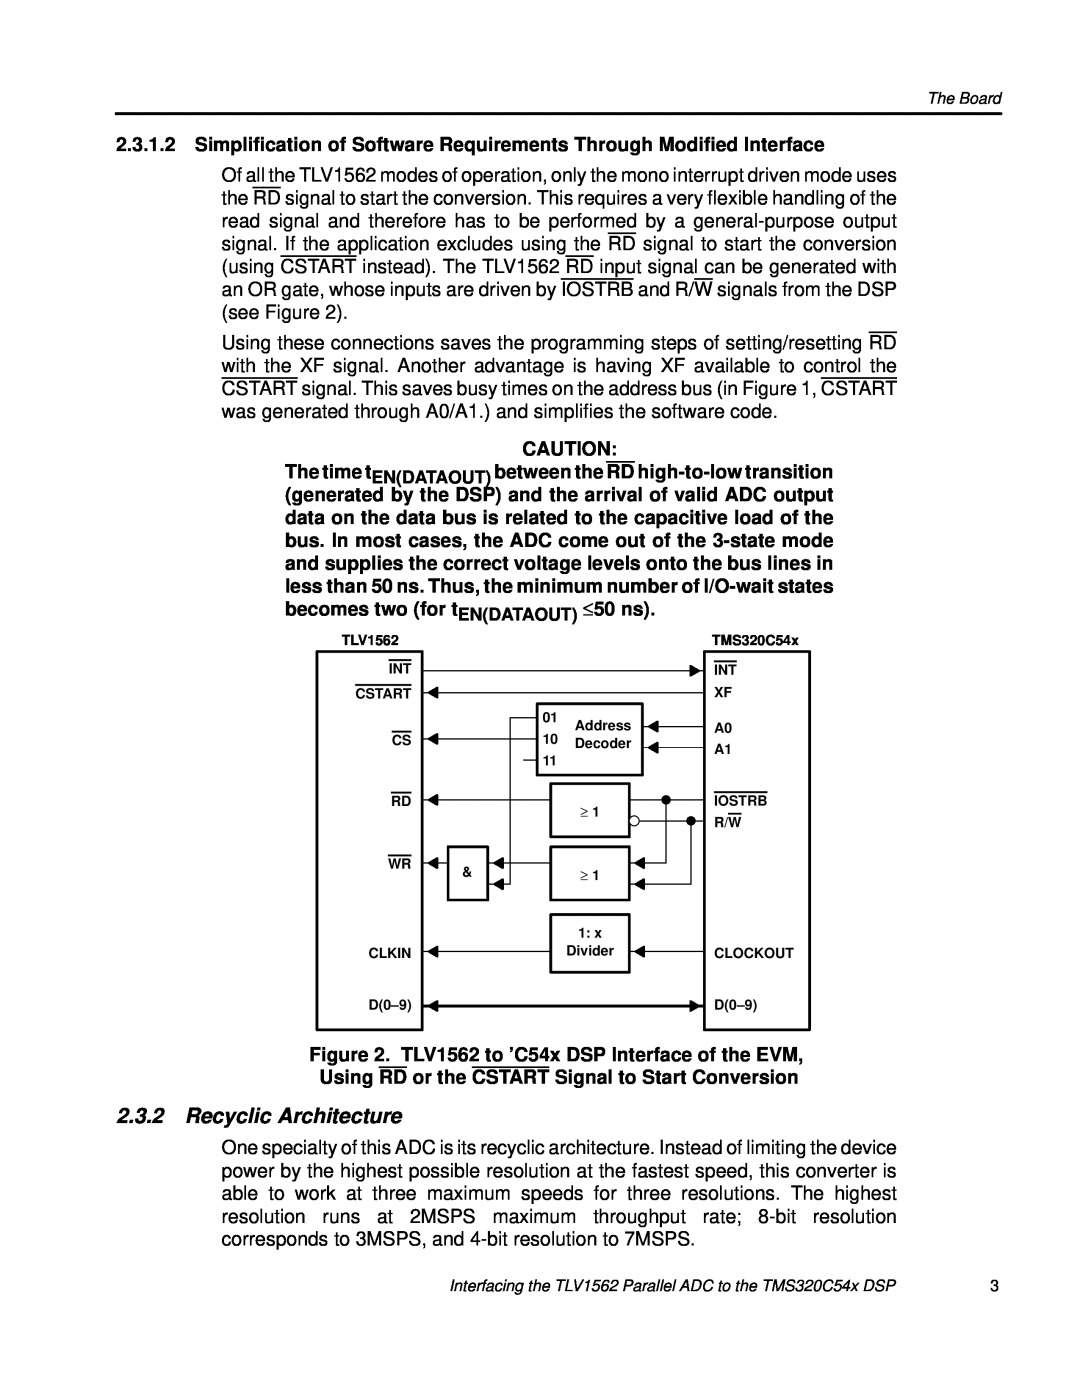 Texas Instruments manual Recyclic Architecture, TLV1562 to ’C54x DSP Interface of the EVM 